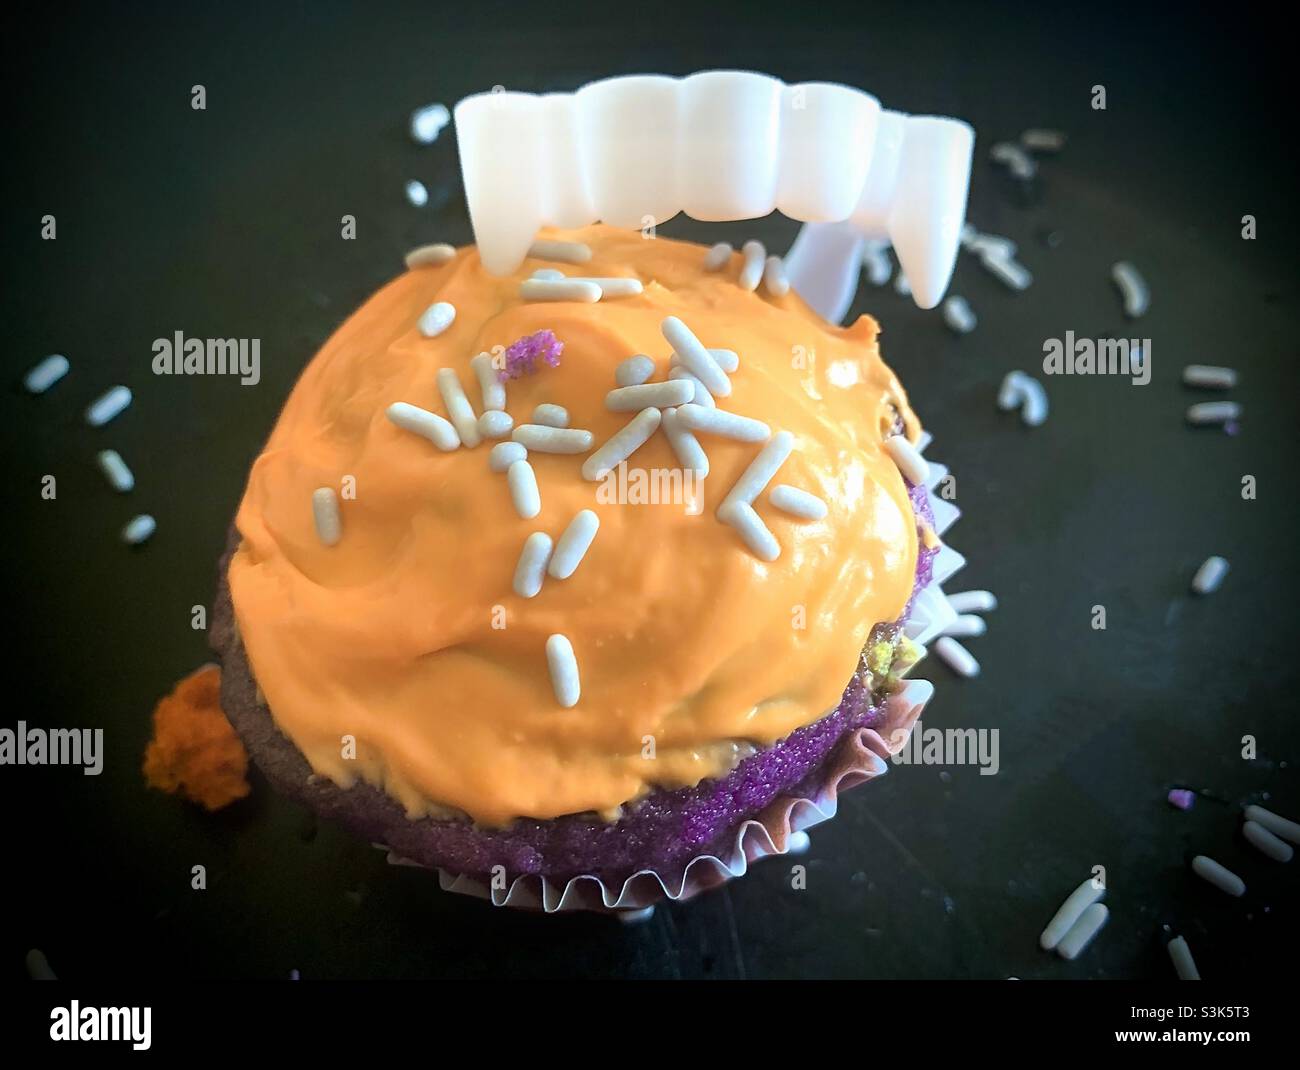 Halloween cupcakes with orange frosting and chocolate cake with sprinkles on top Stock Photo